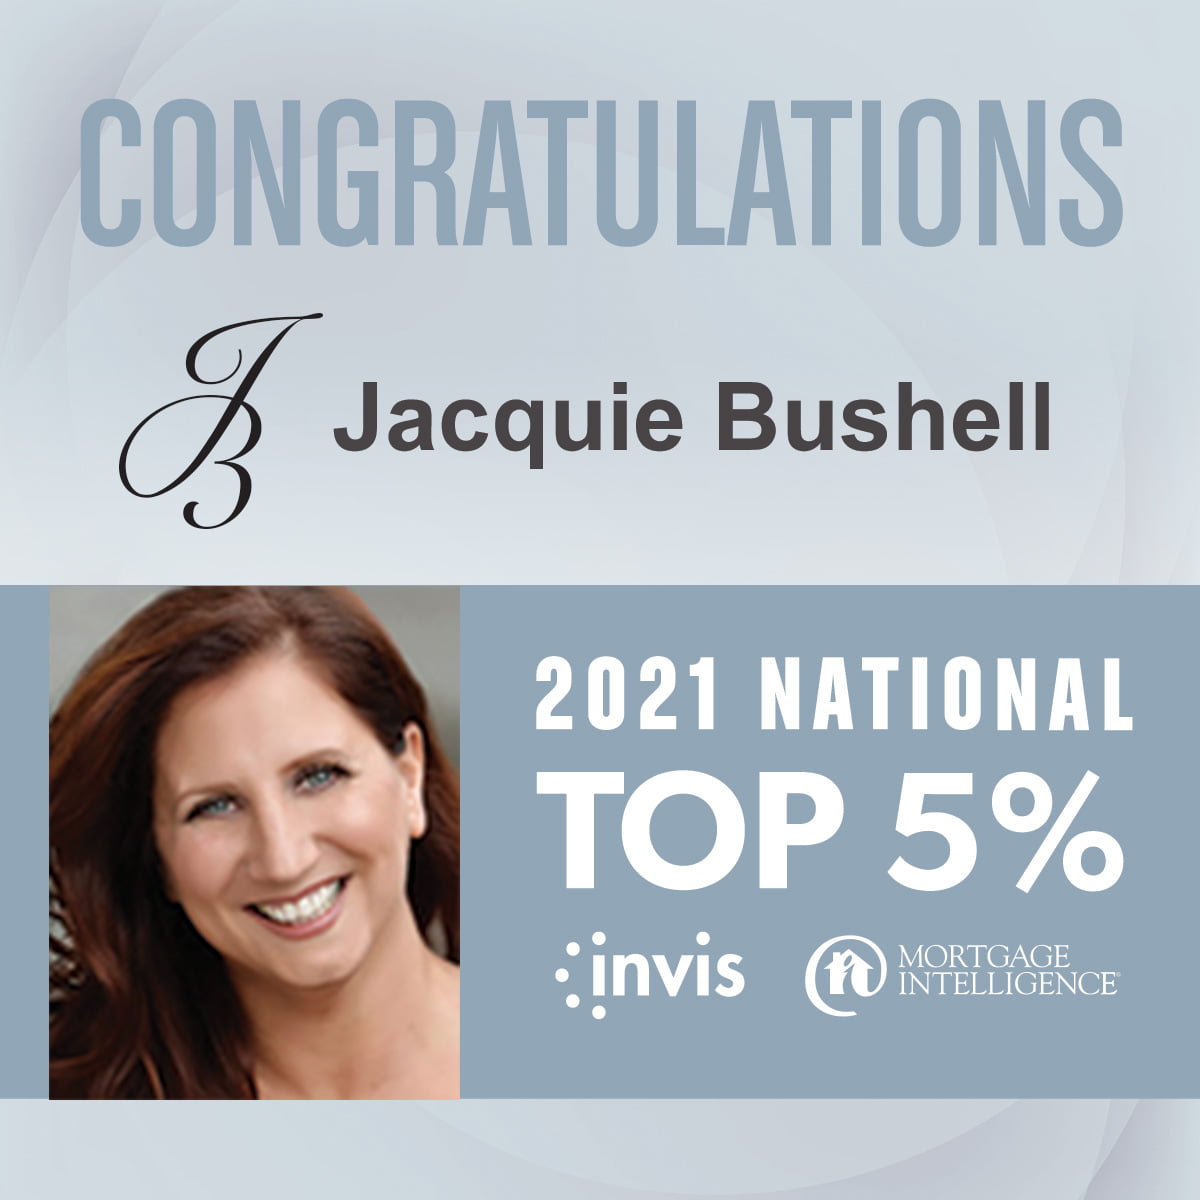 Jacquie Bushell, Top 5% of Mortgage Brokers